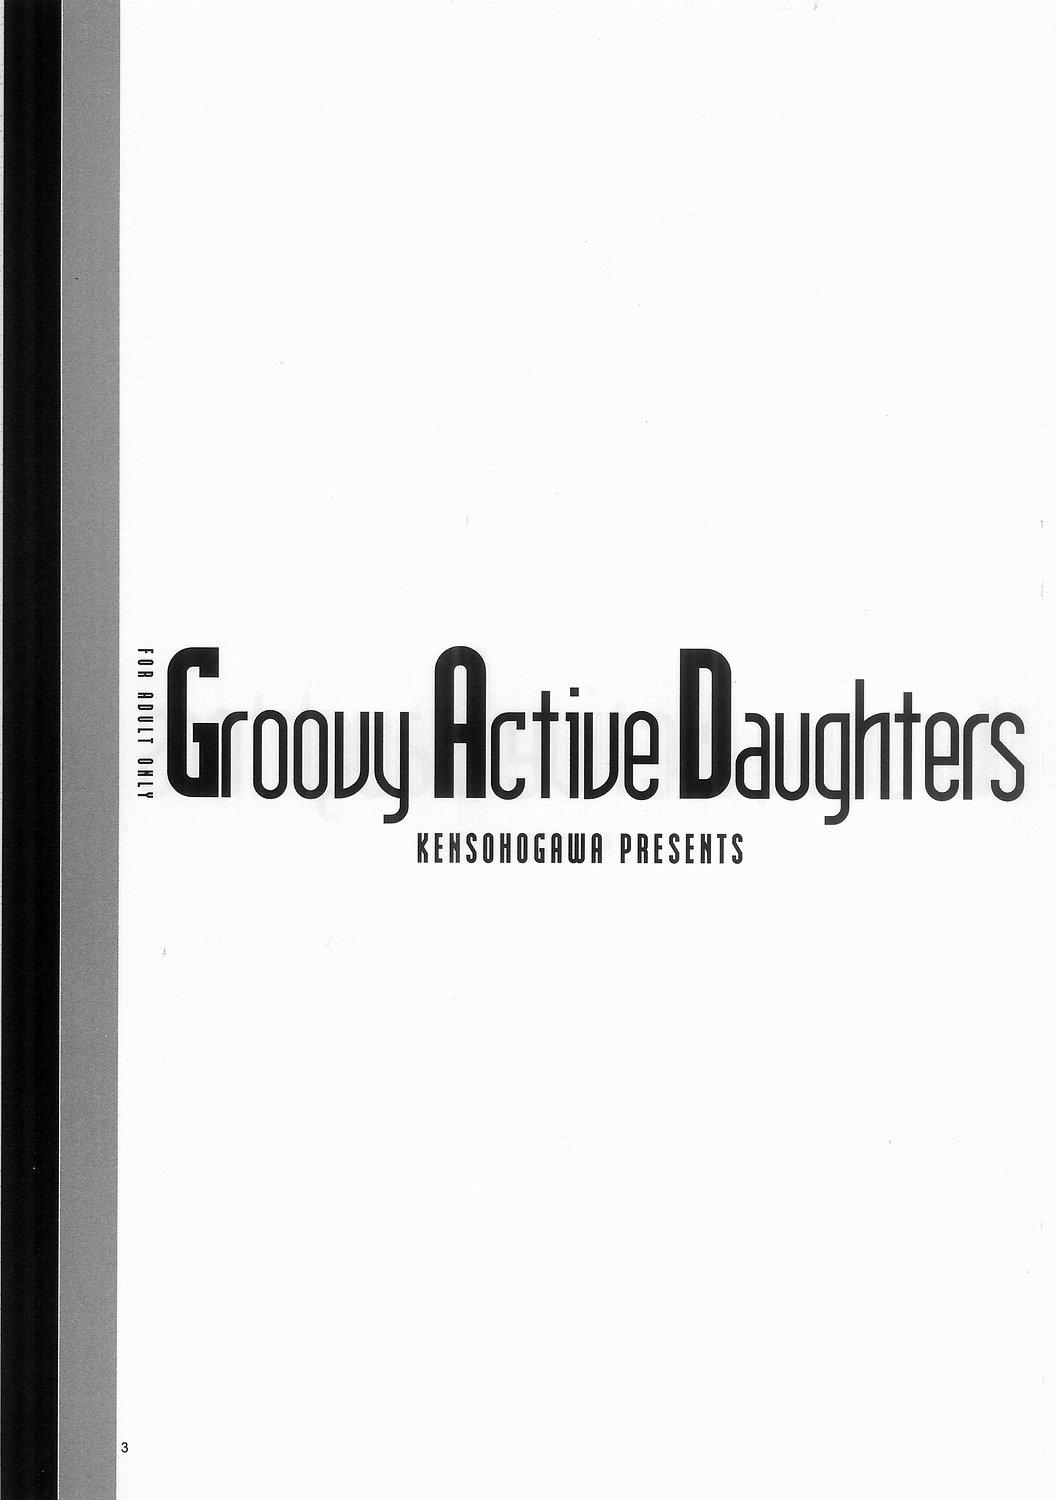 Groovy Active Daughters 2